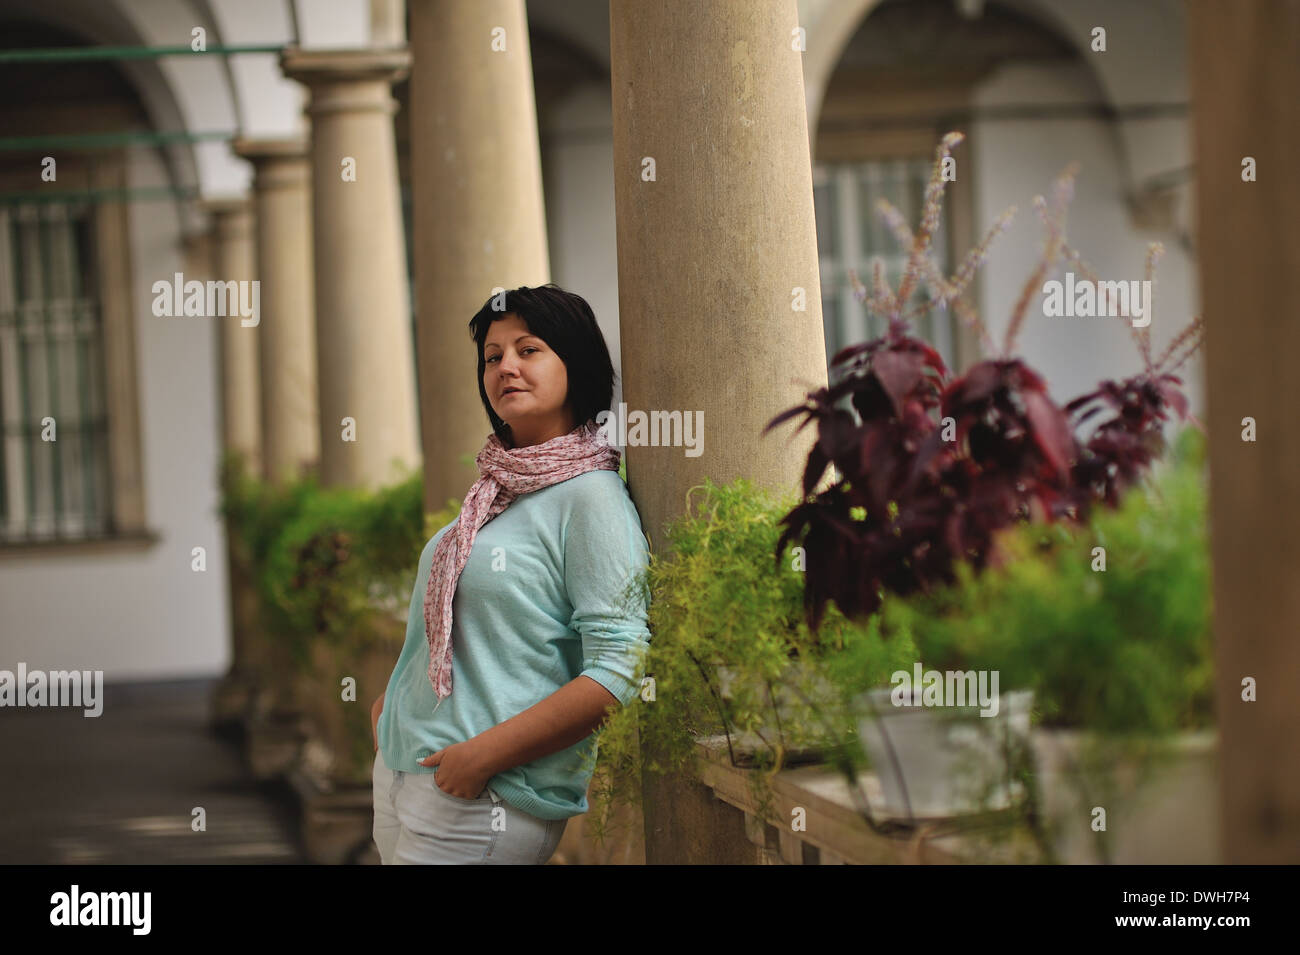 woman in trousers posing in antique balcony with stone pillars and railings Stock Photo